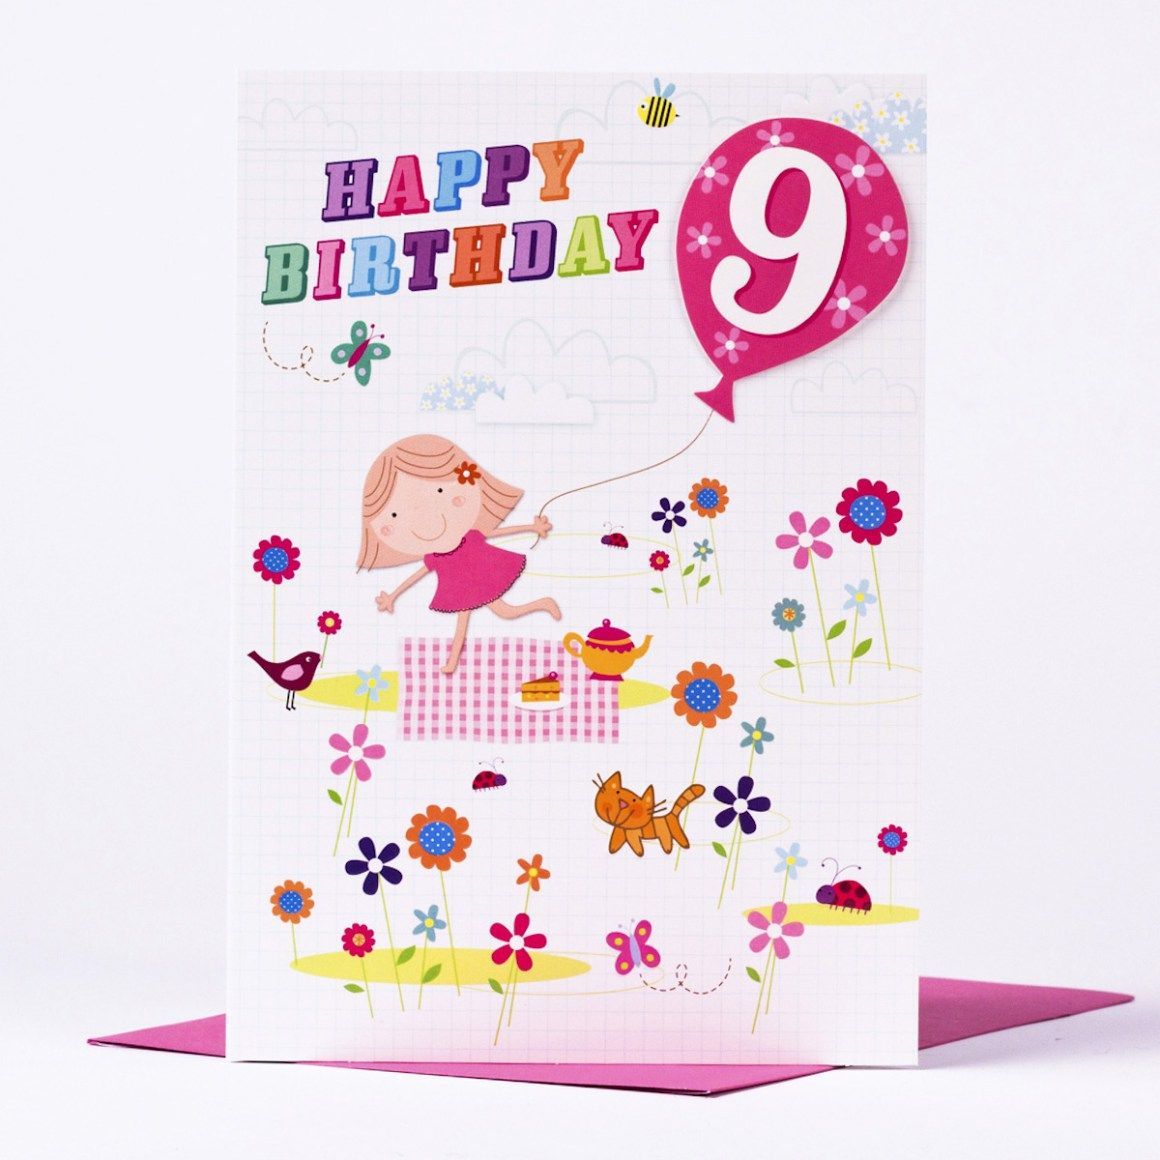 9th Birthday Wishes Wishes & Cards For 9 Years Old. Birthday wishes cards, Birthday wishes